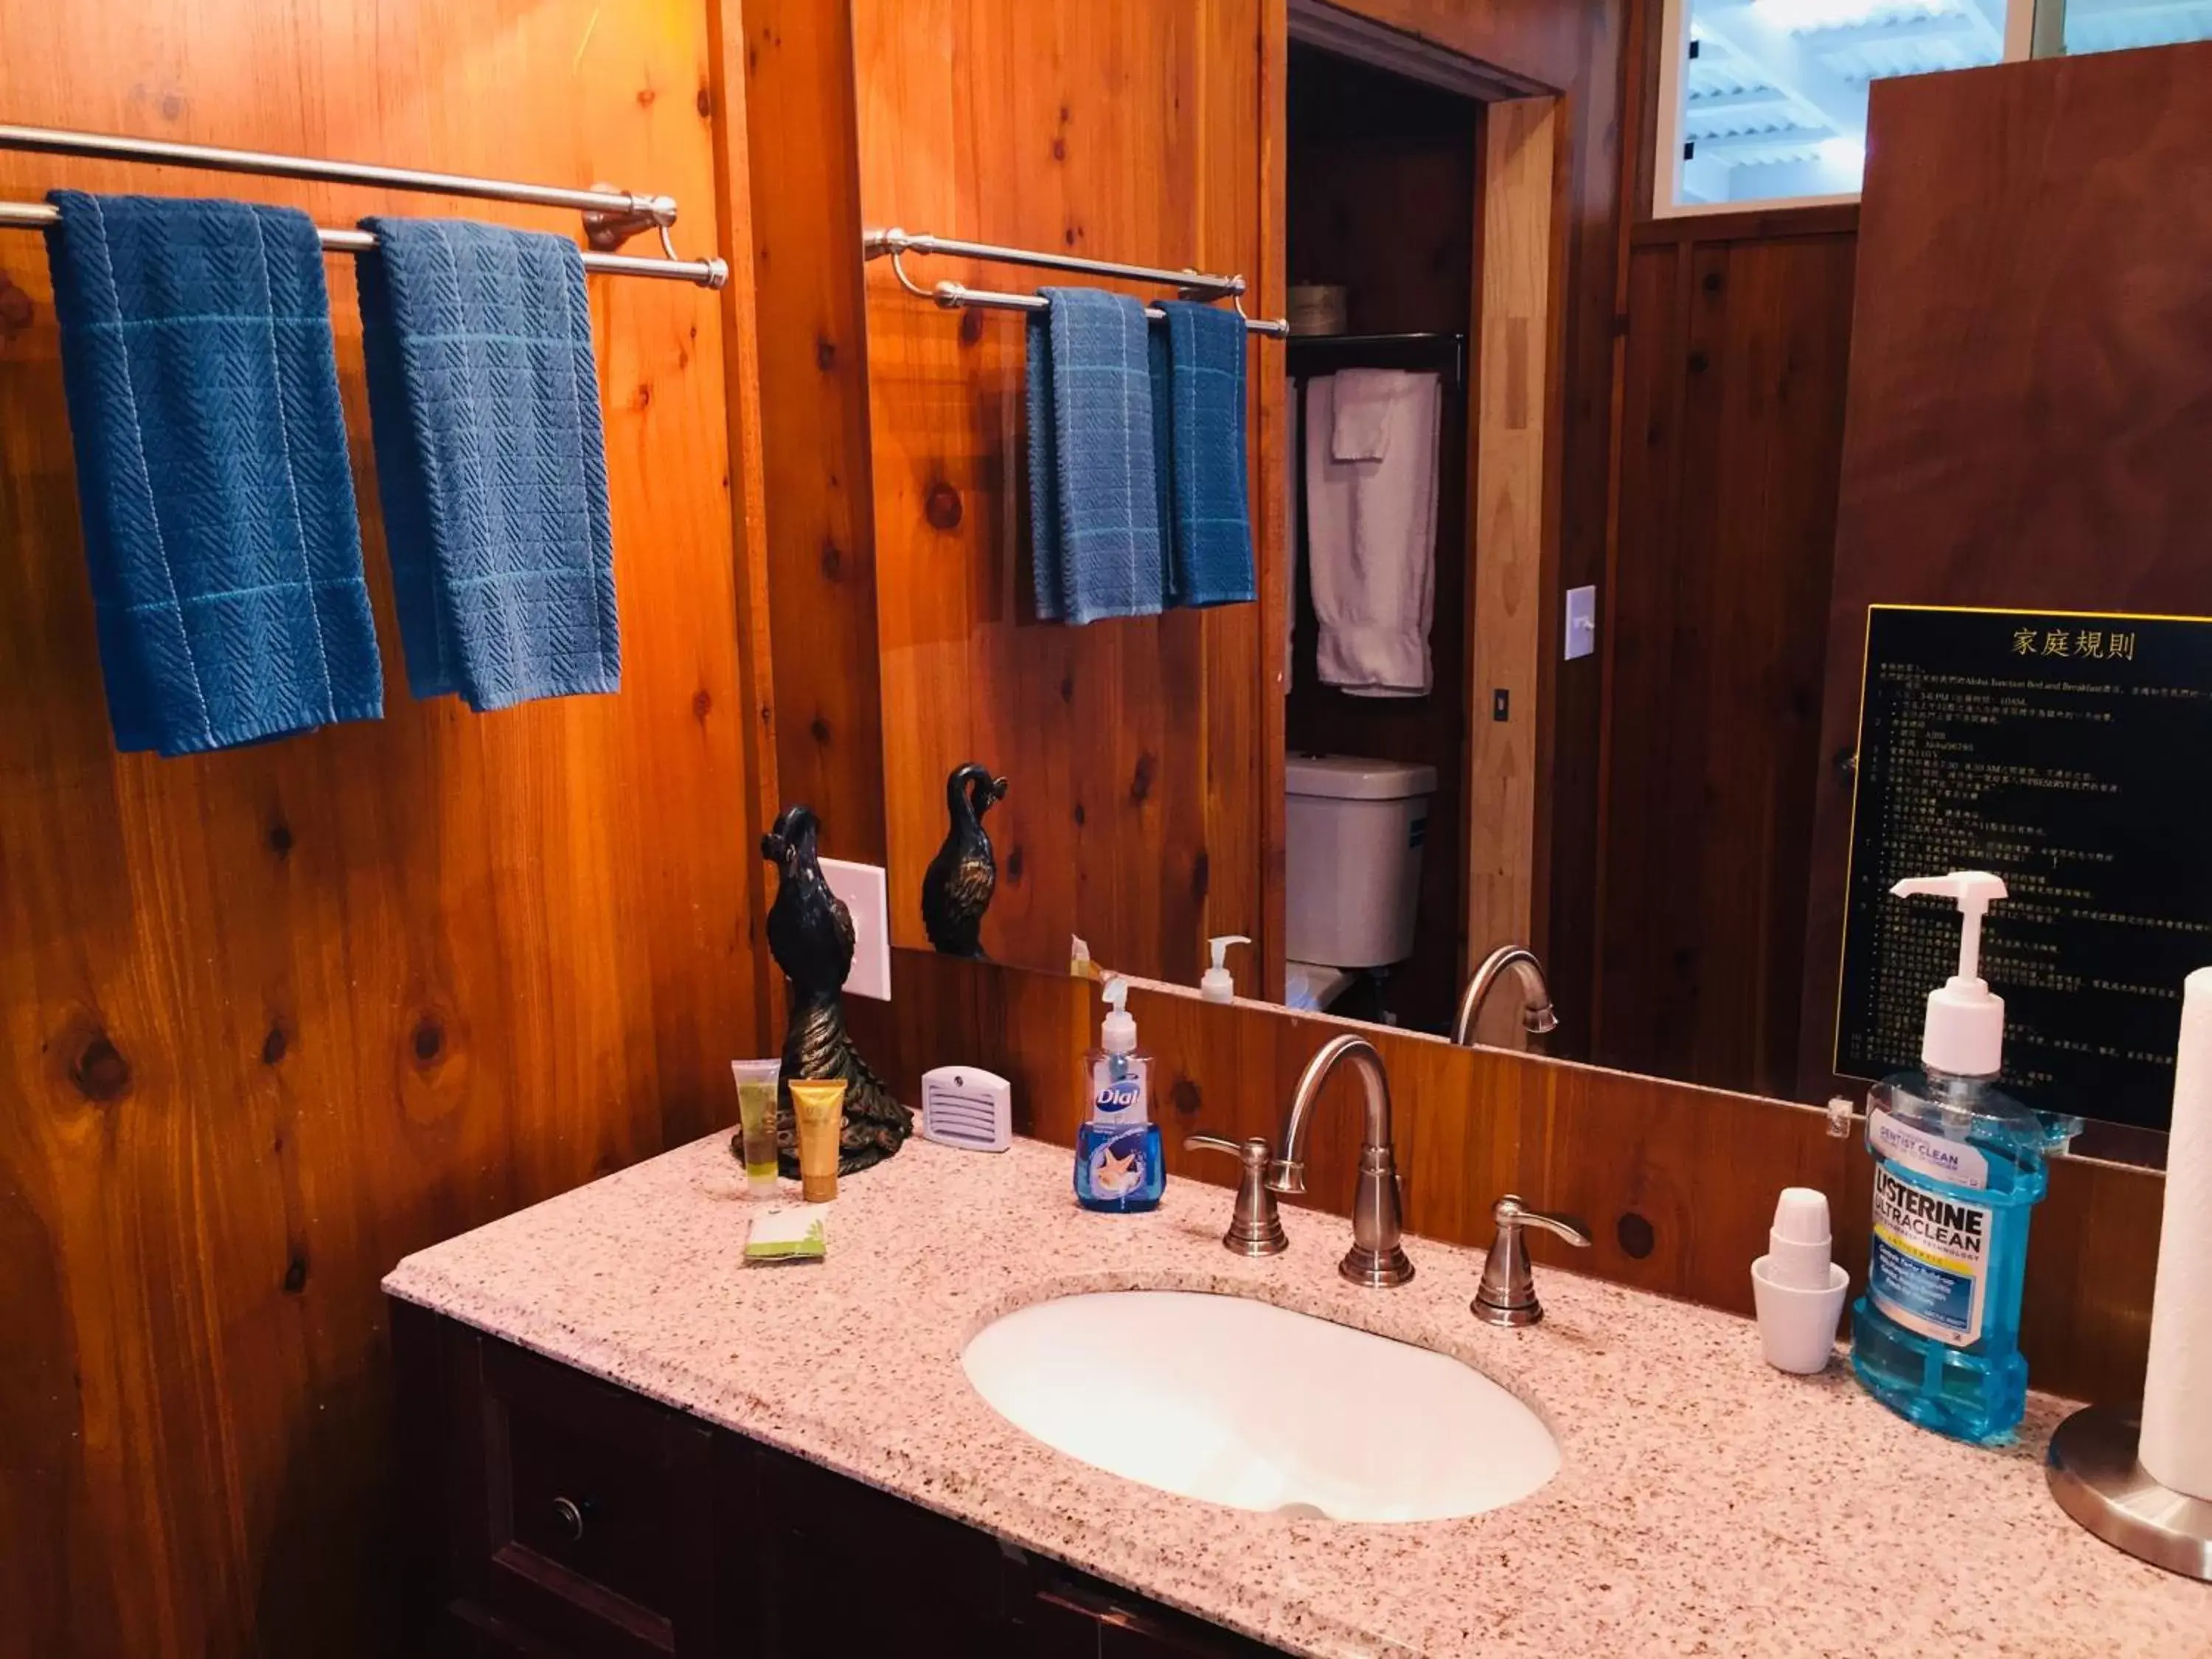 Bathroom in Aloha Junction Guest House - 5 min from Hawaii Volcanoes National Park